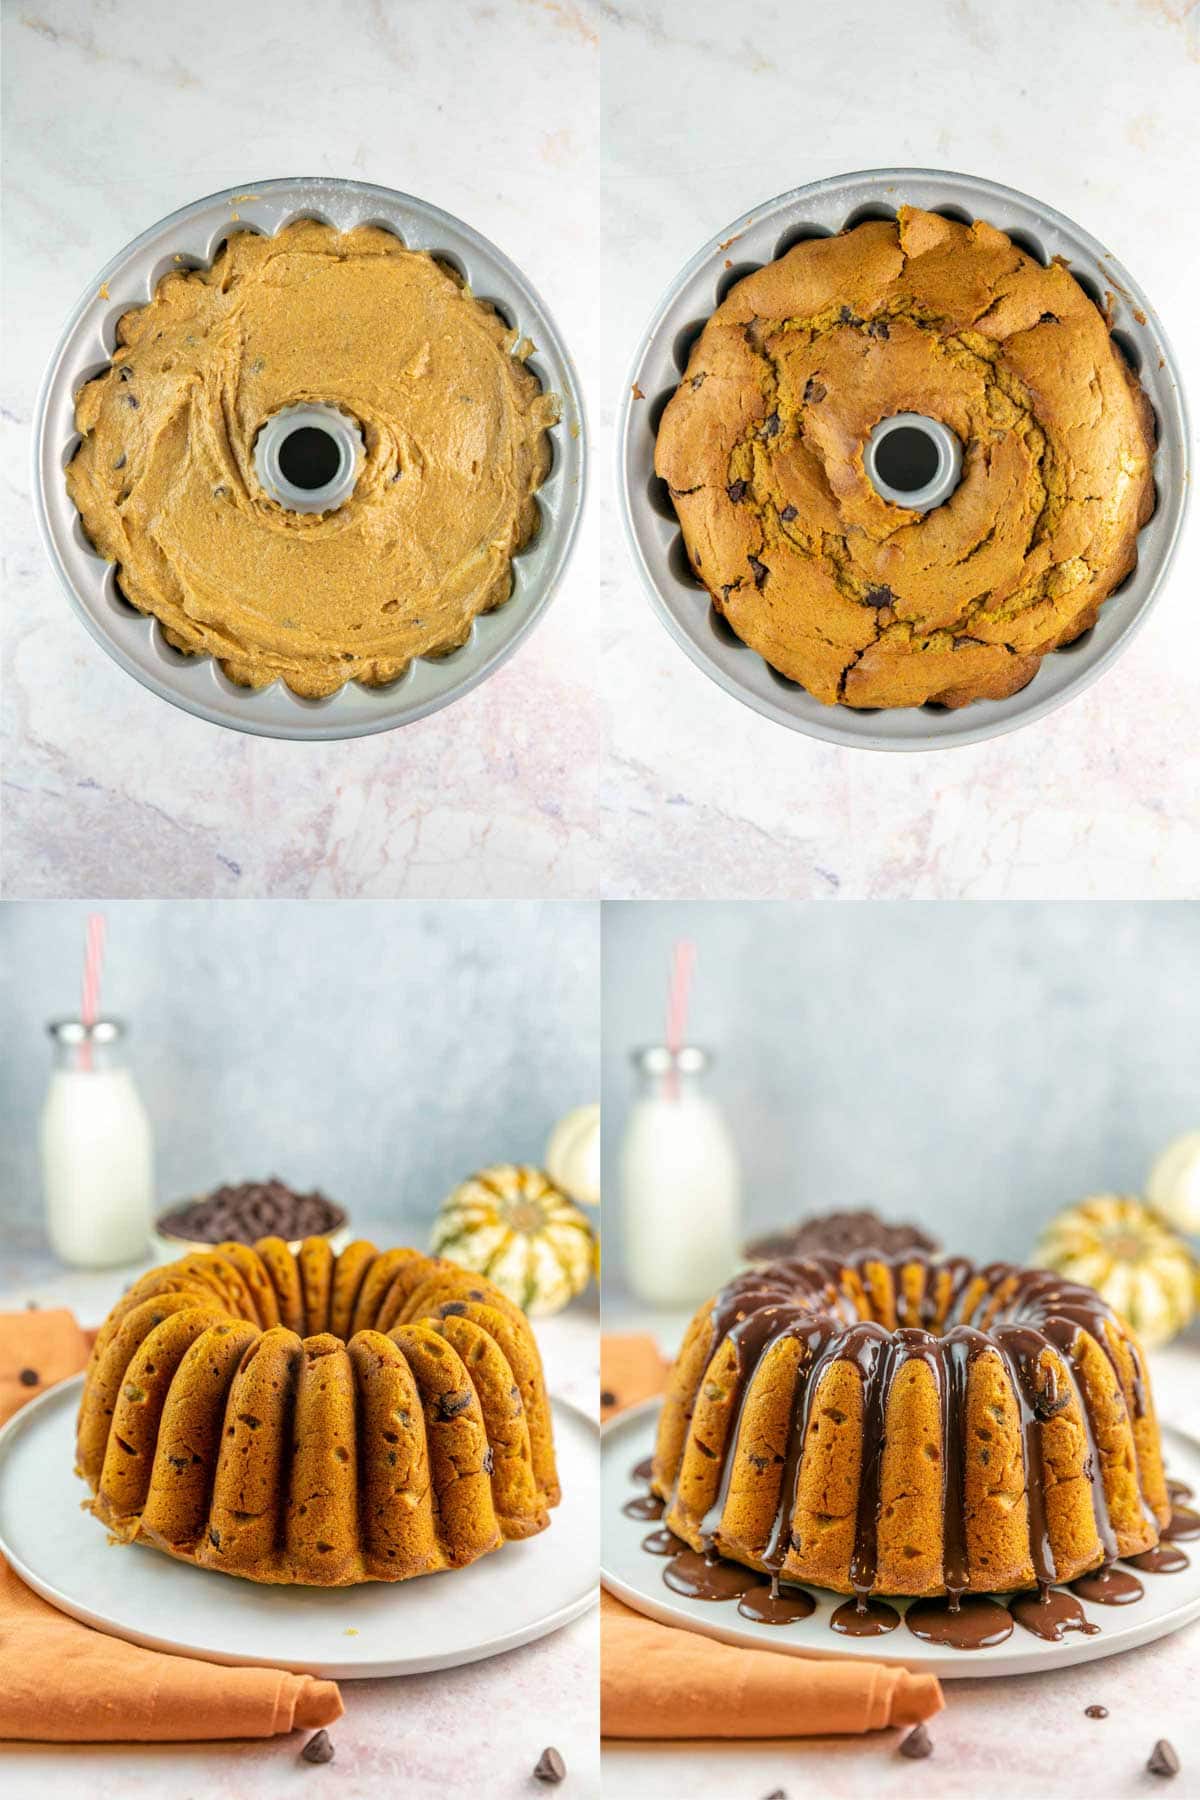 bundt cake before baking, after baking, and after pouring on chocolate glaze